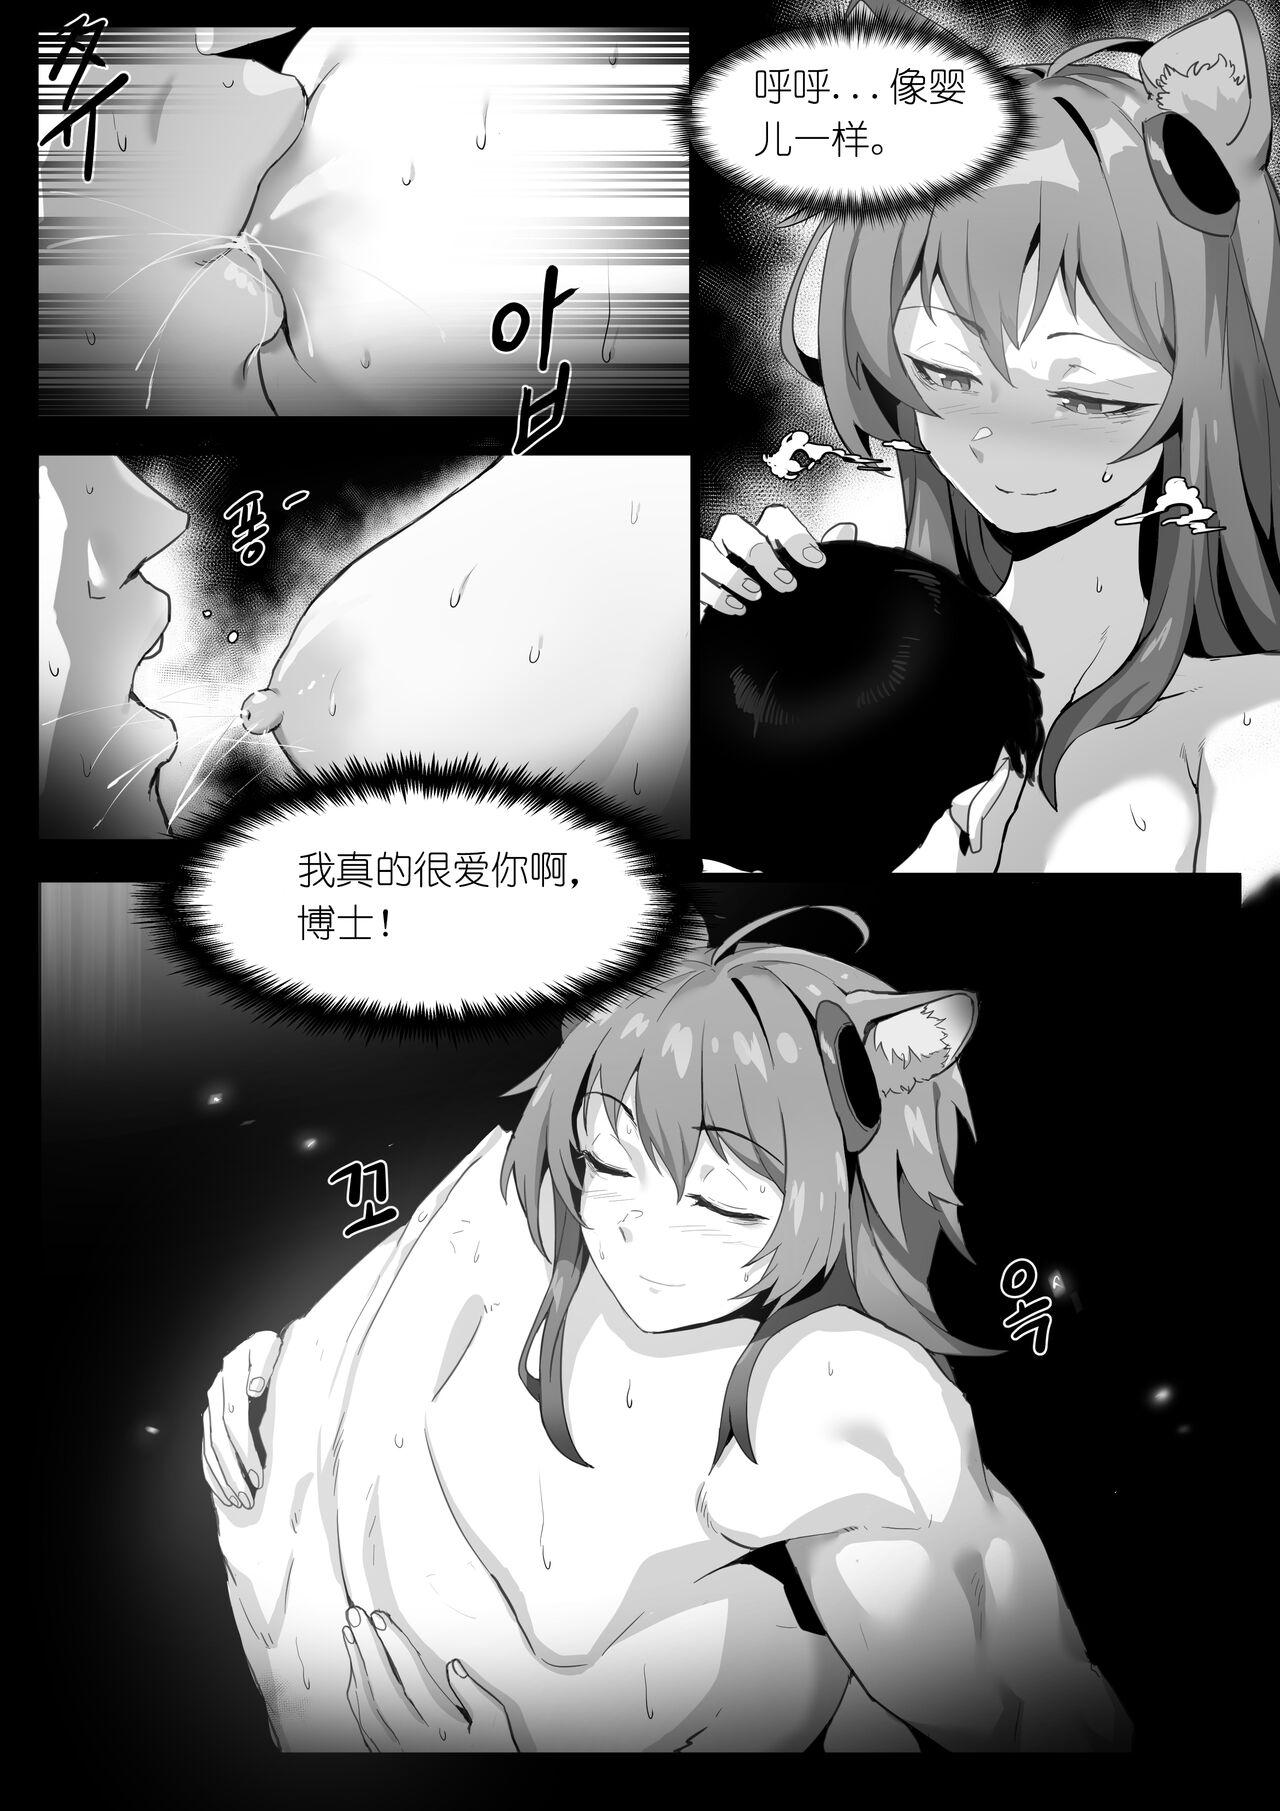 Creampie 欲望方舟记录3 - Arknights Made - Page 3